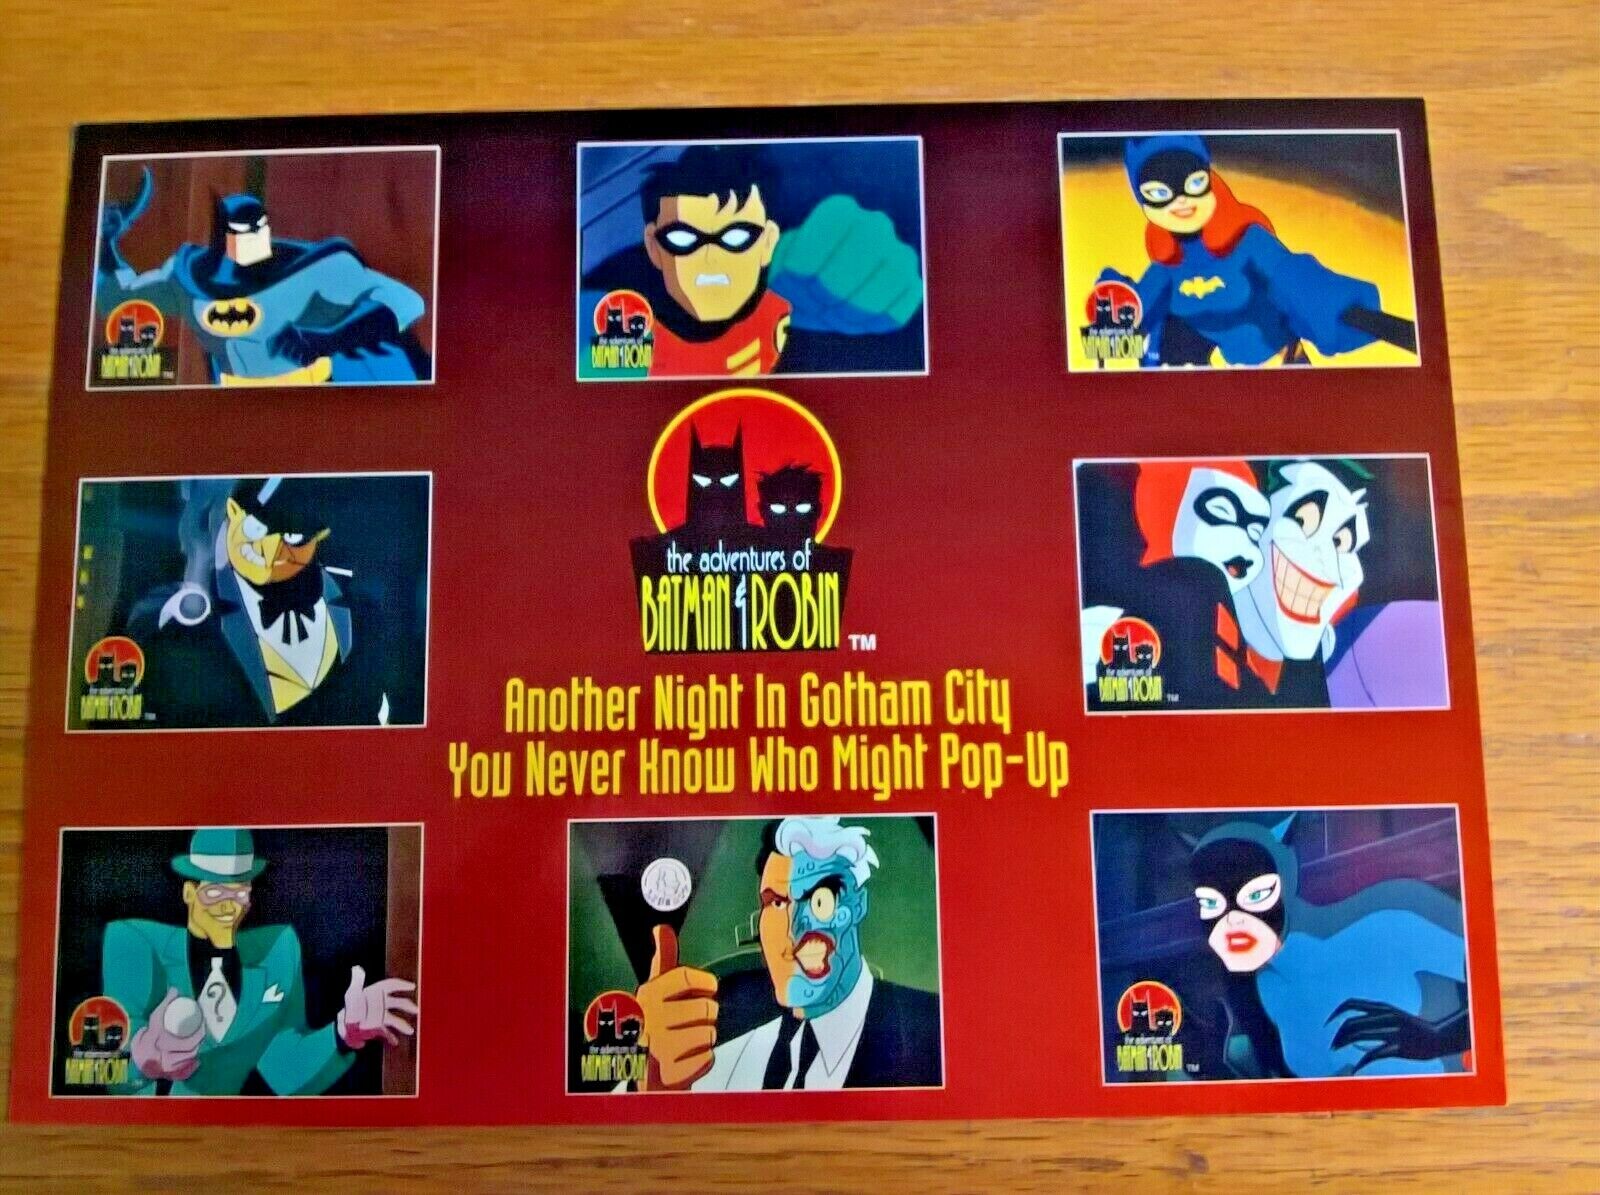 Deluxe promo promotional trade card sheet: Skybox Adventures of Batman and Robin